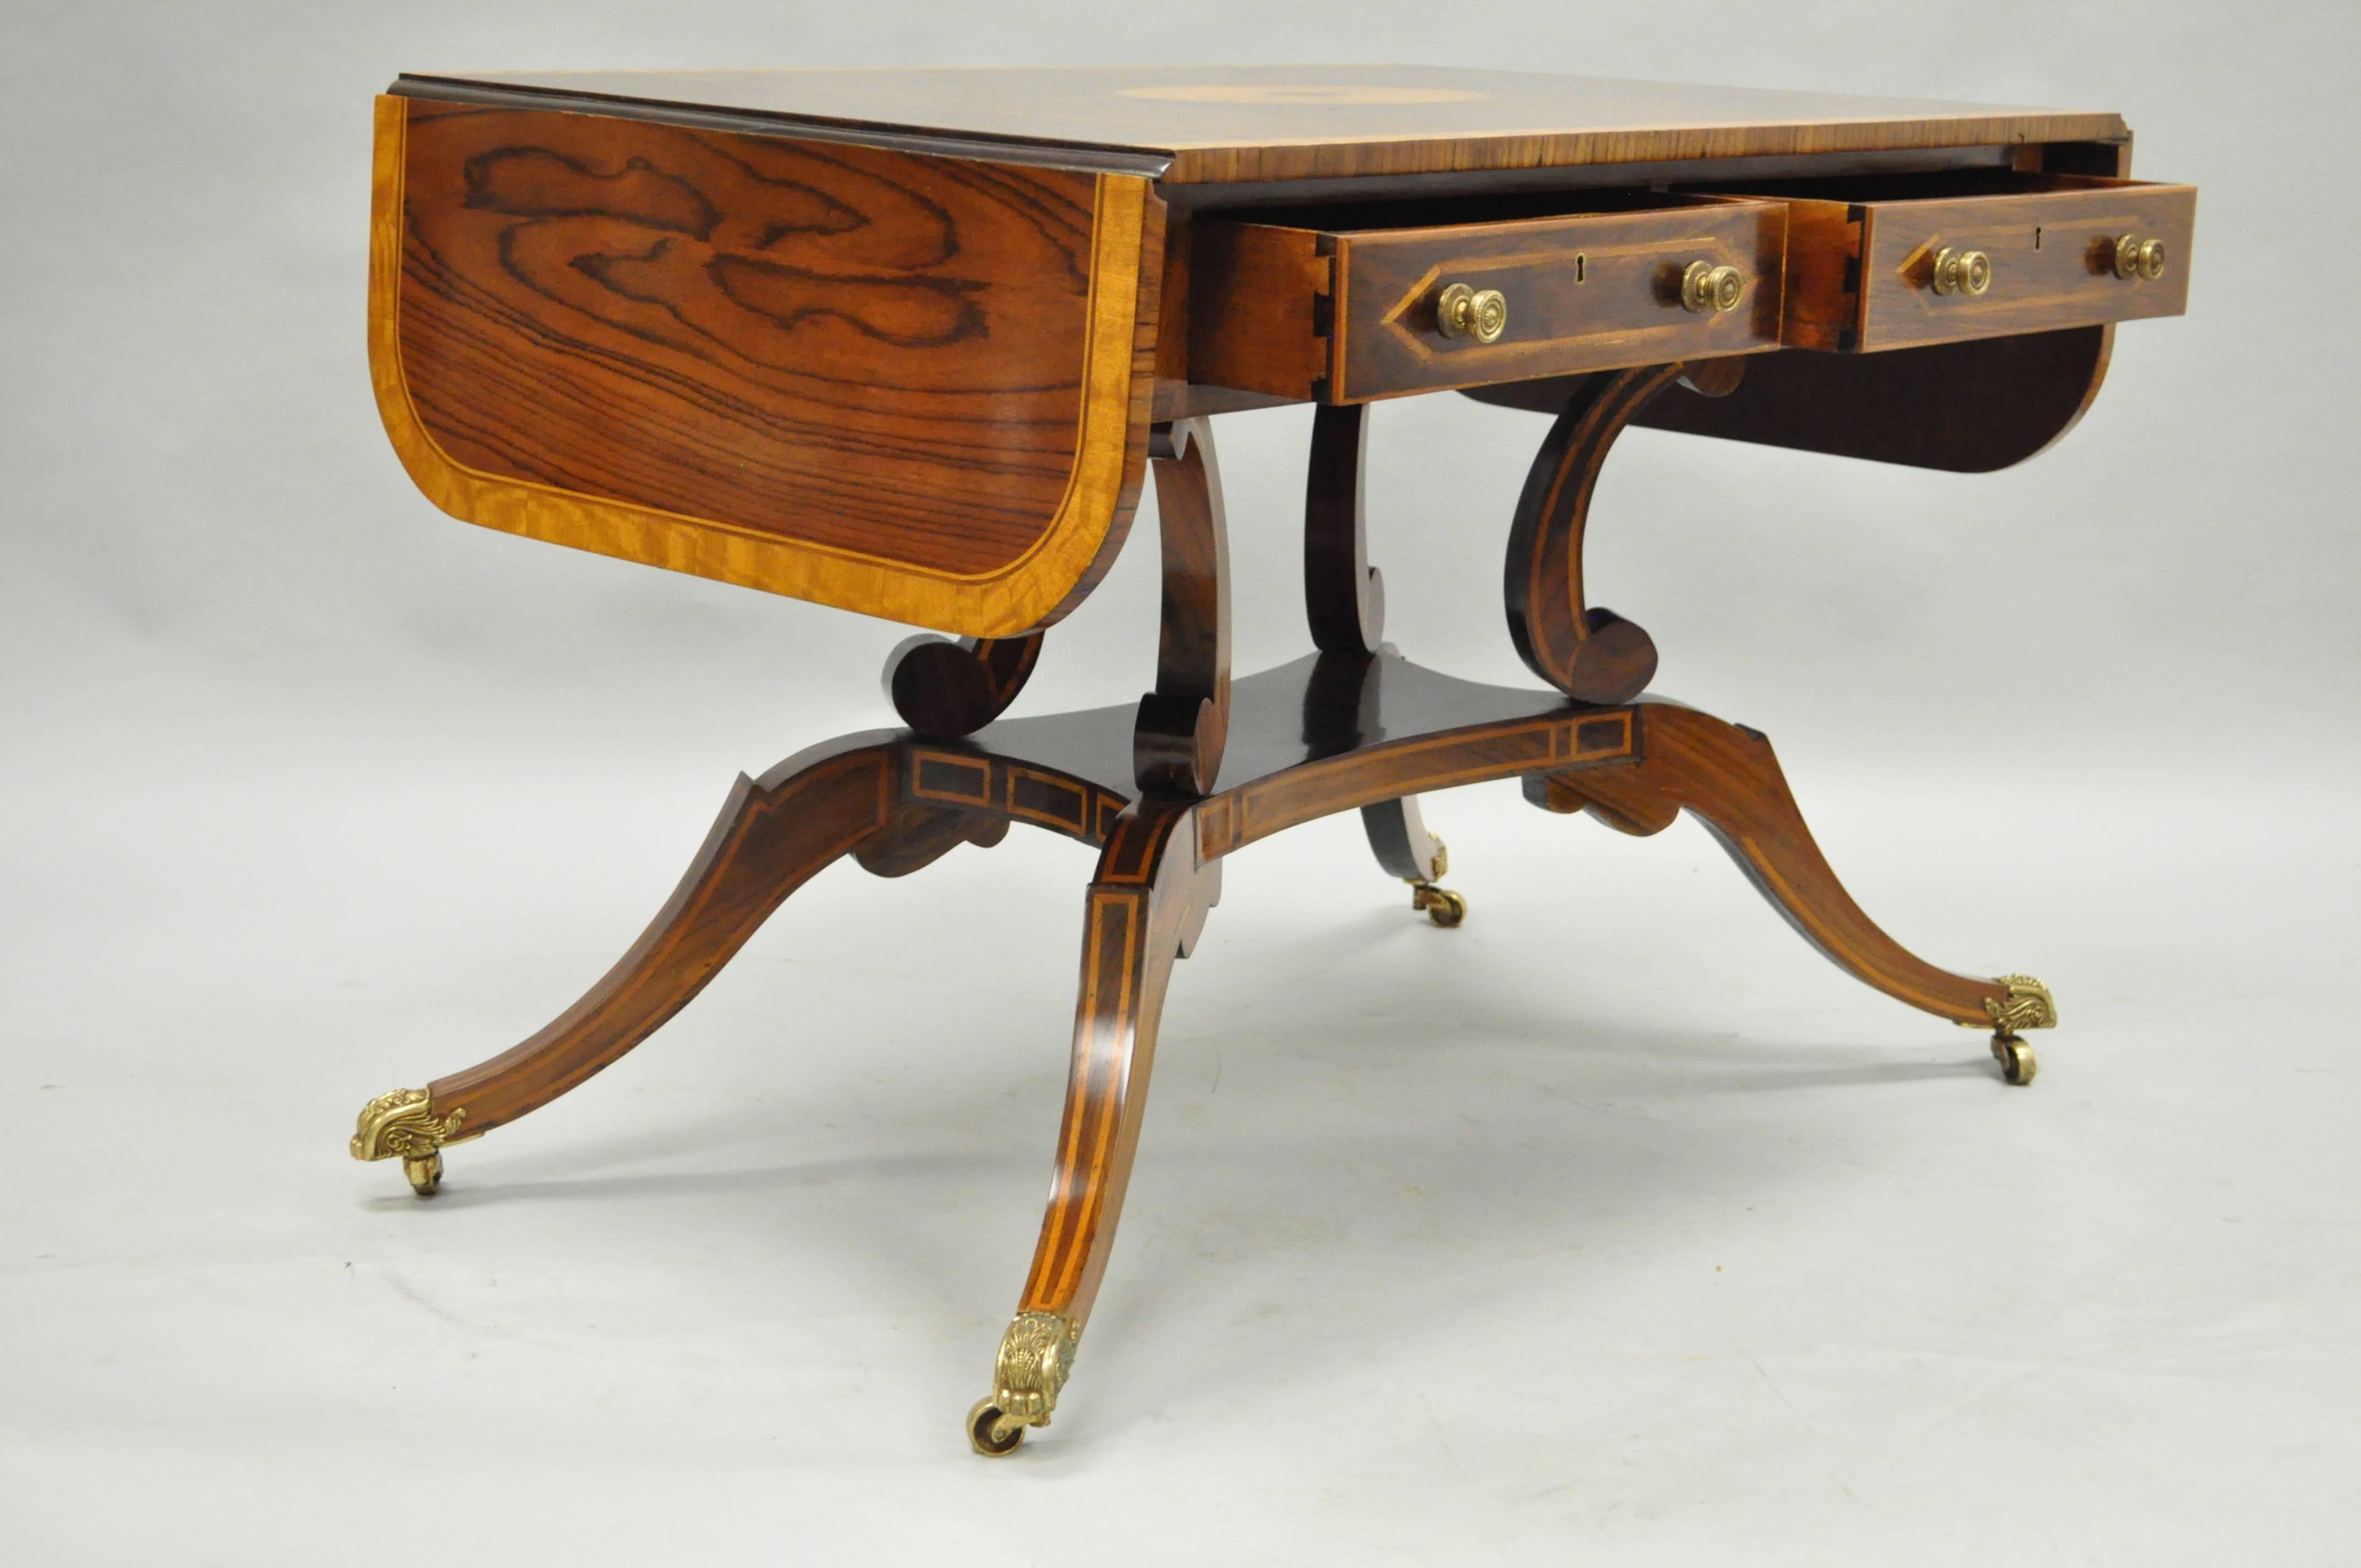 Impressive late 20th century regency/neoclassical style drop-leaf sofa table attributed to Maitland Smith. This rosewood and mahogany table features satinwood inlays and banding, pinwheel inlaid top, two dovetailed drawers, solid brass paw foot